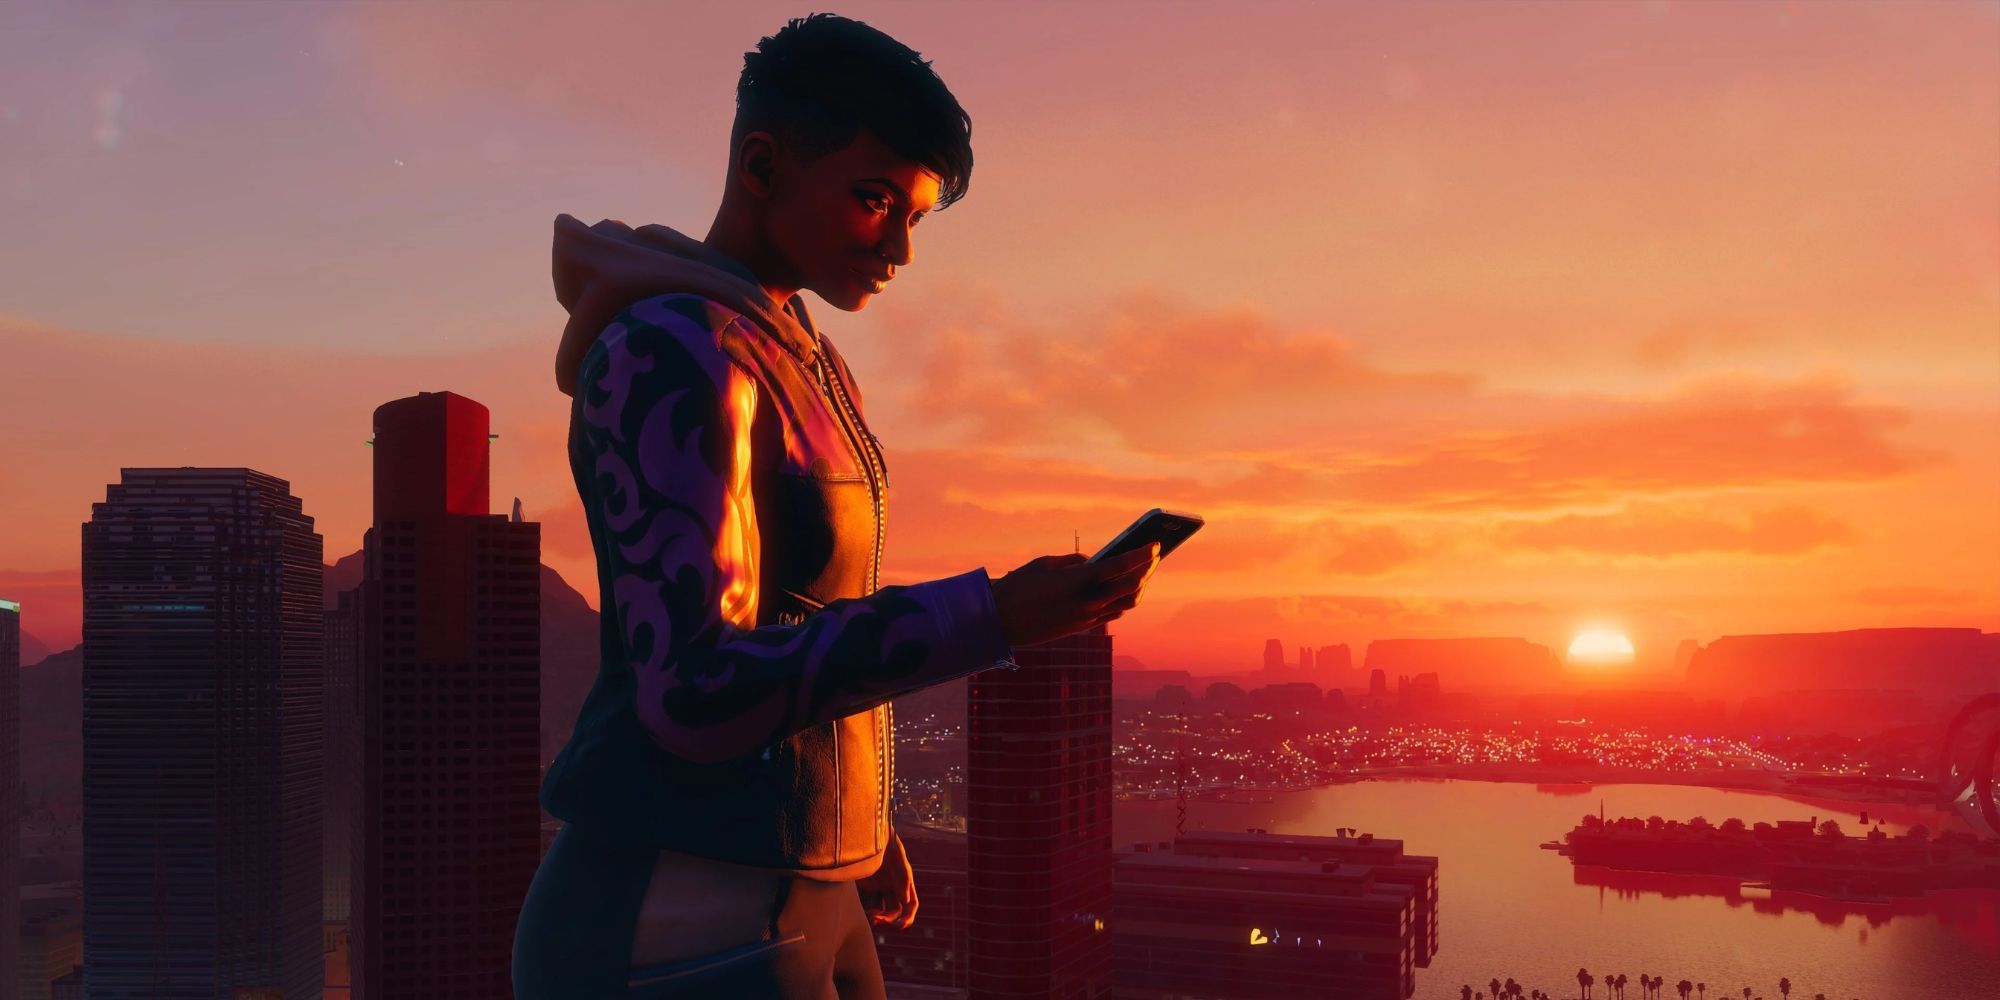 The boss from the Saints Row reboot, looking at a phone in the sunset